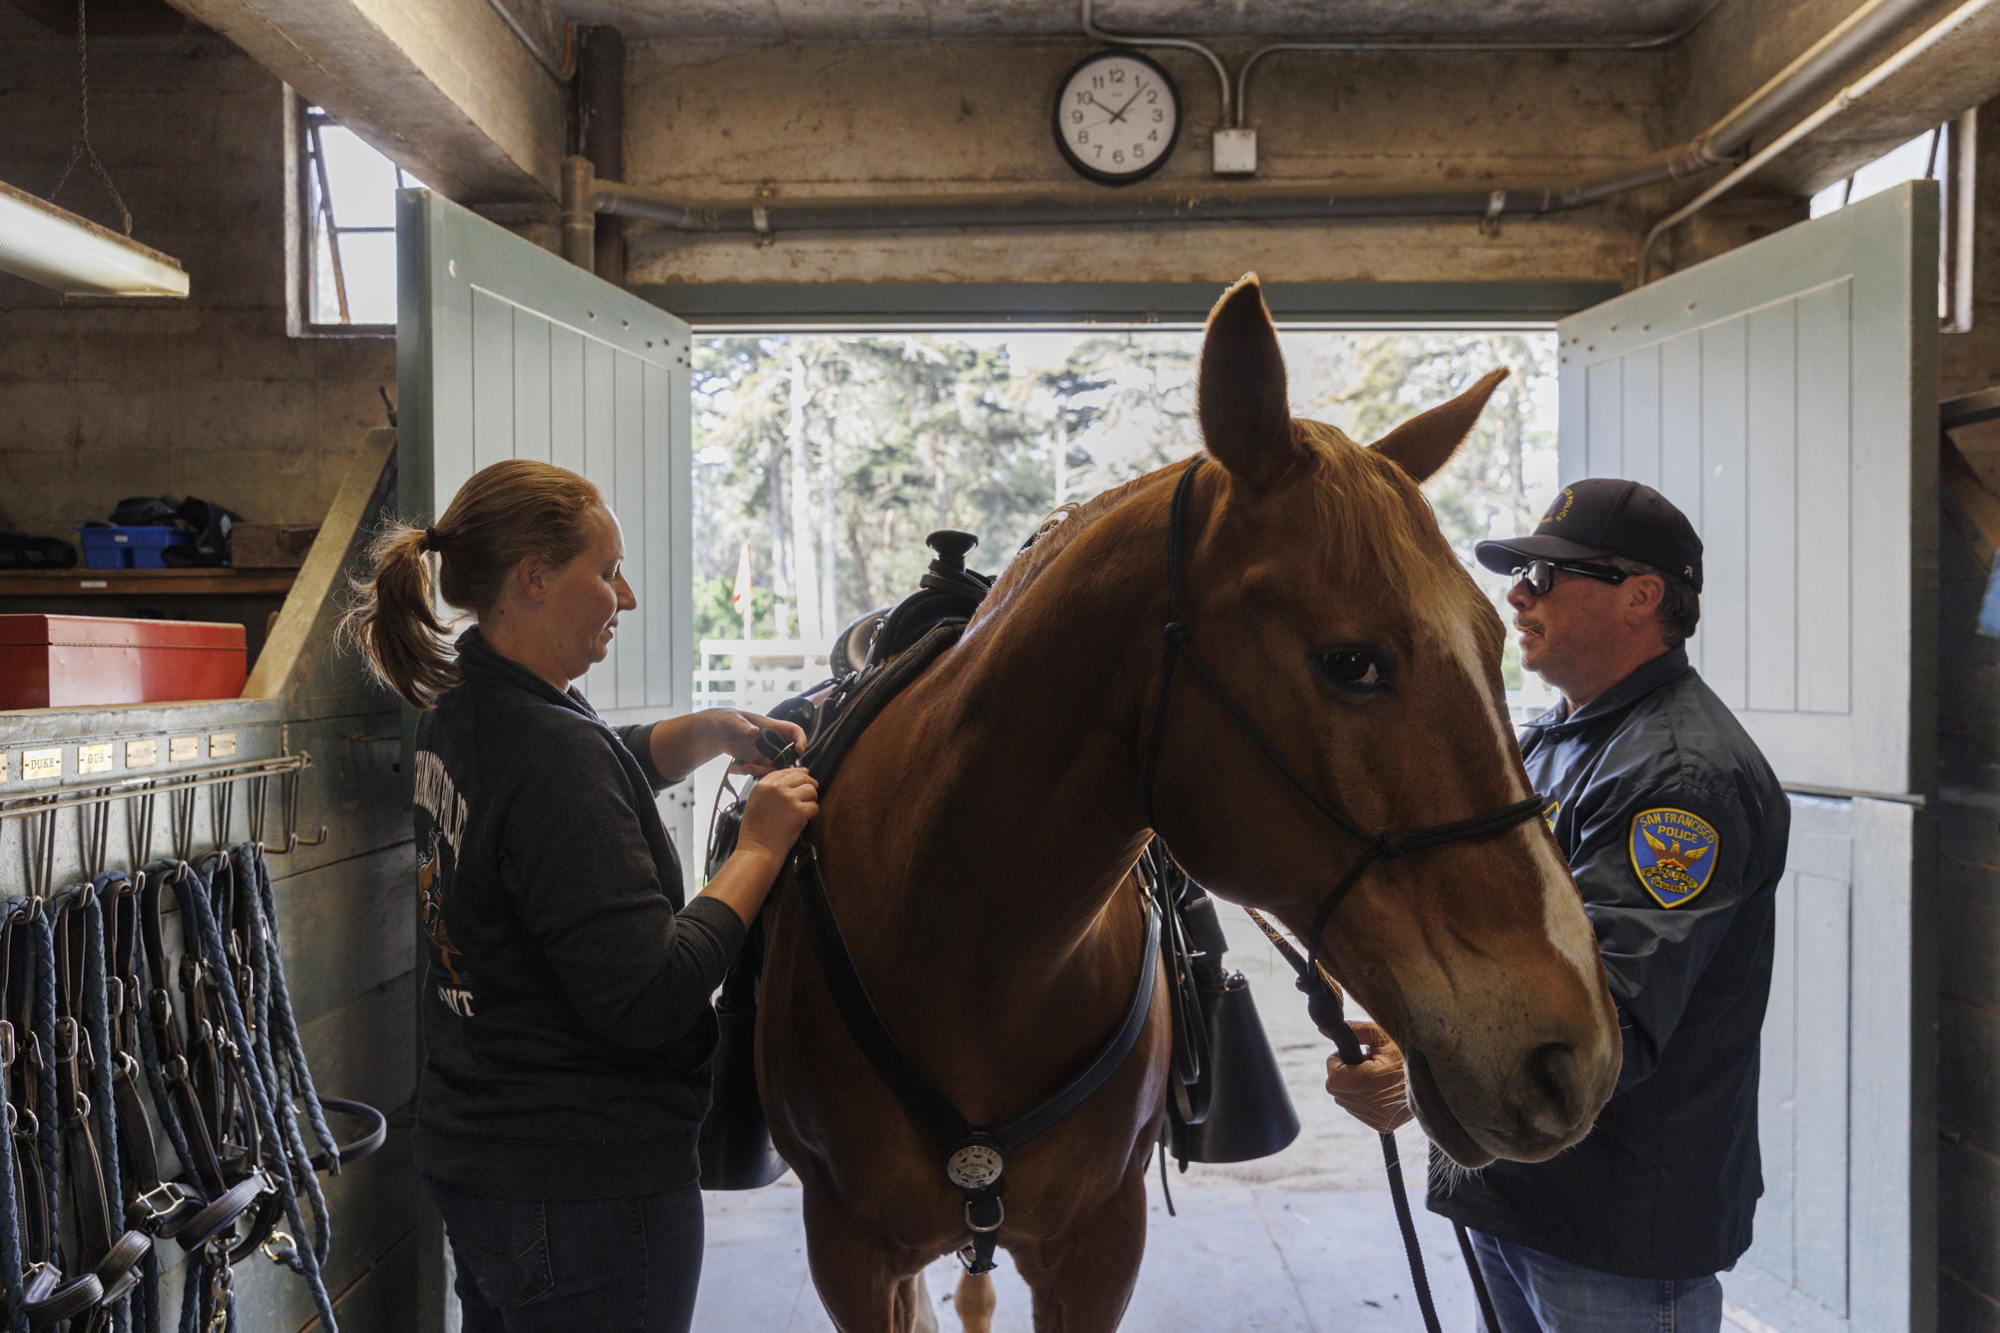 Two people groom a horse inside a barn.